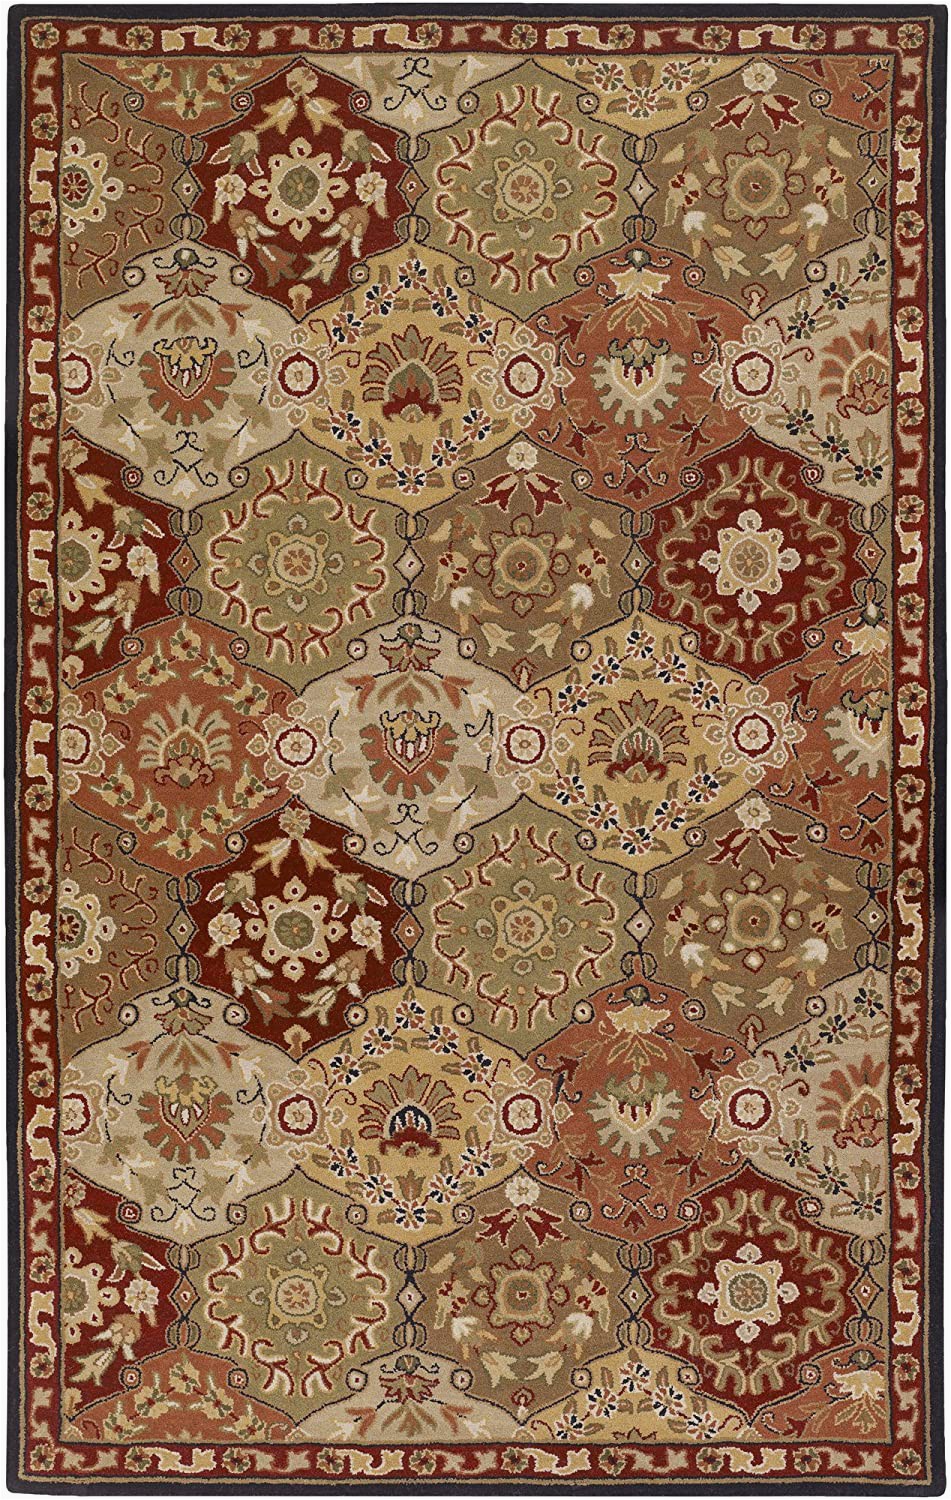 9 Foot Square area Rugs Surya Cae 1034 Caesar Red 9 Feet 9 Inch Square area Rug